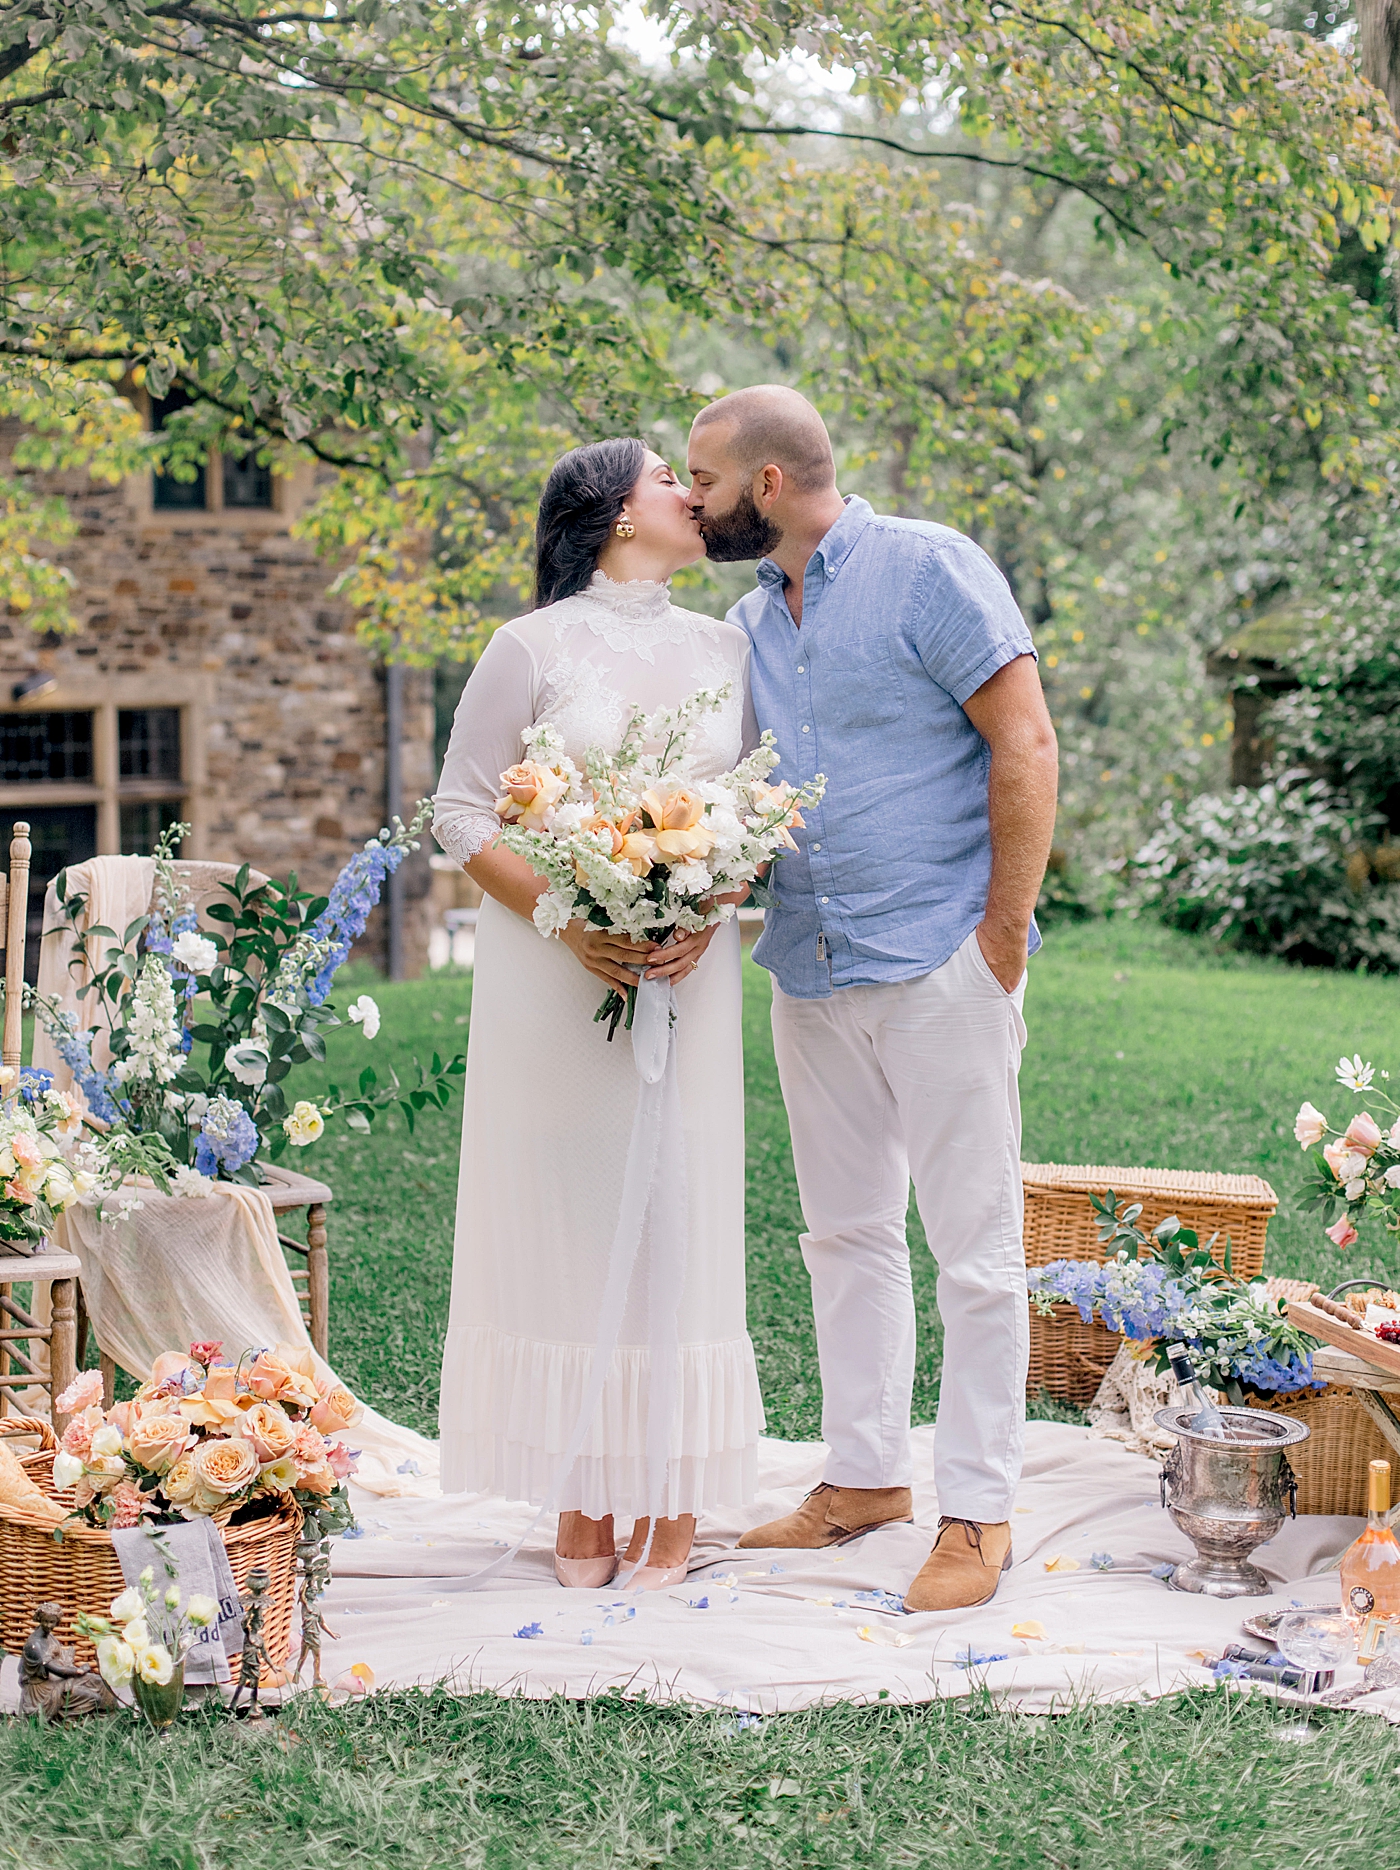 Bride and groom kissing at their picnic full of flowers | Styling and Planning Engagement Sessions with Hope Helmuth Photography